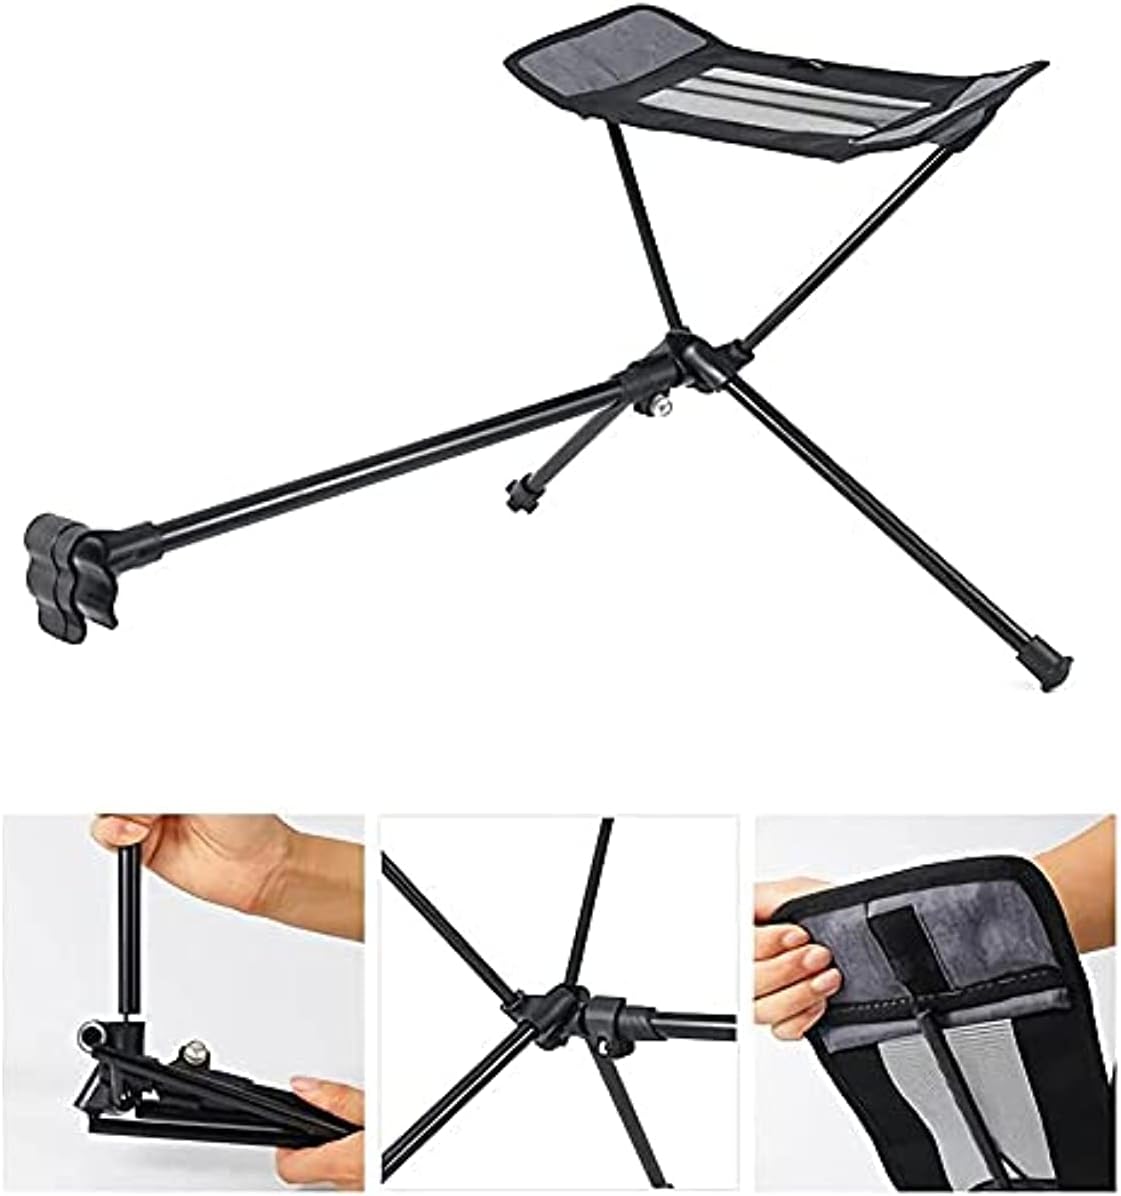 Universal Camping Chair Foot Rest Ottoman Folding Attachable Leg Rest Recliner Lazy Retractable Accessories for Retractable Stool Hammock Beach Chair